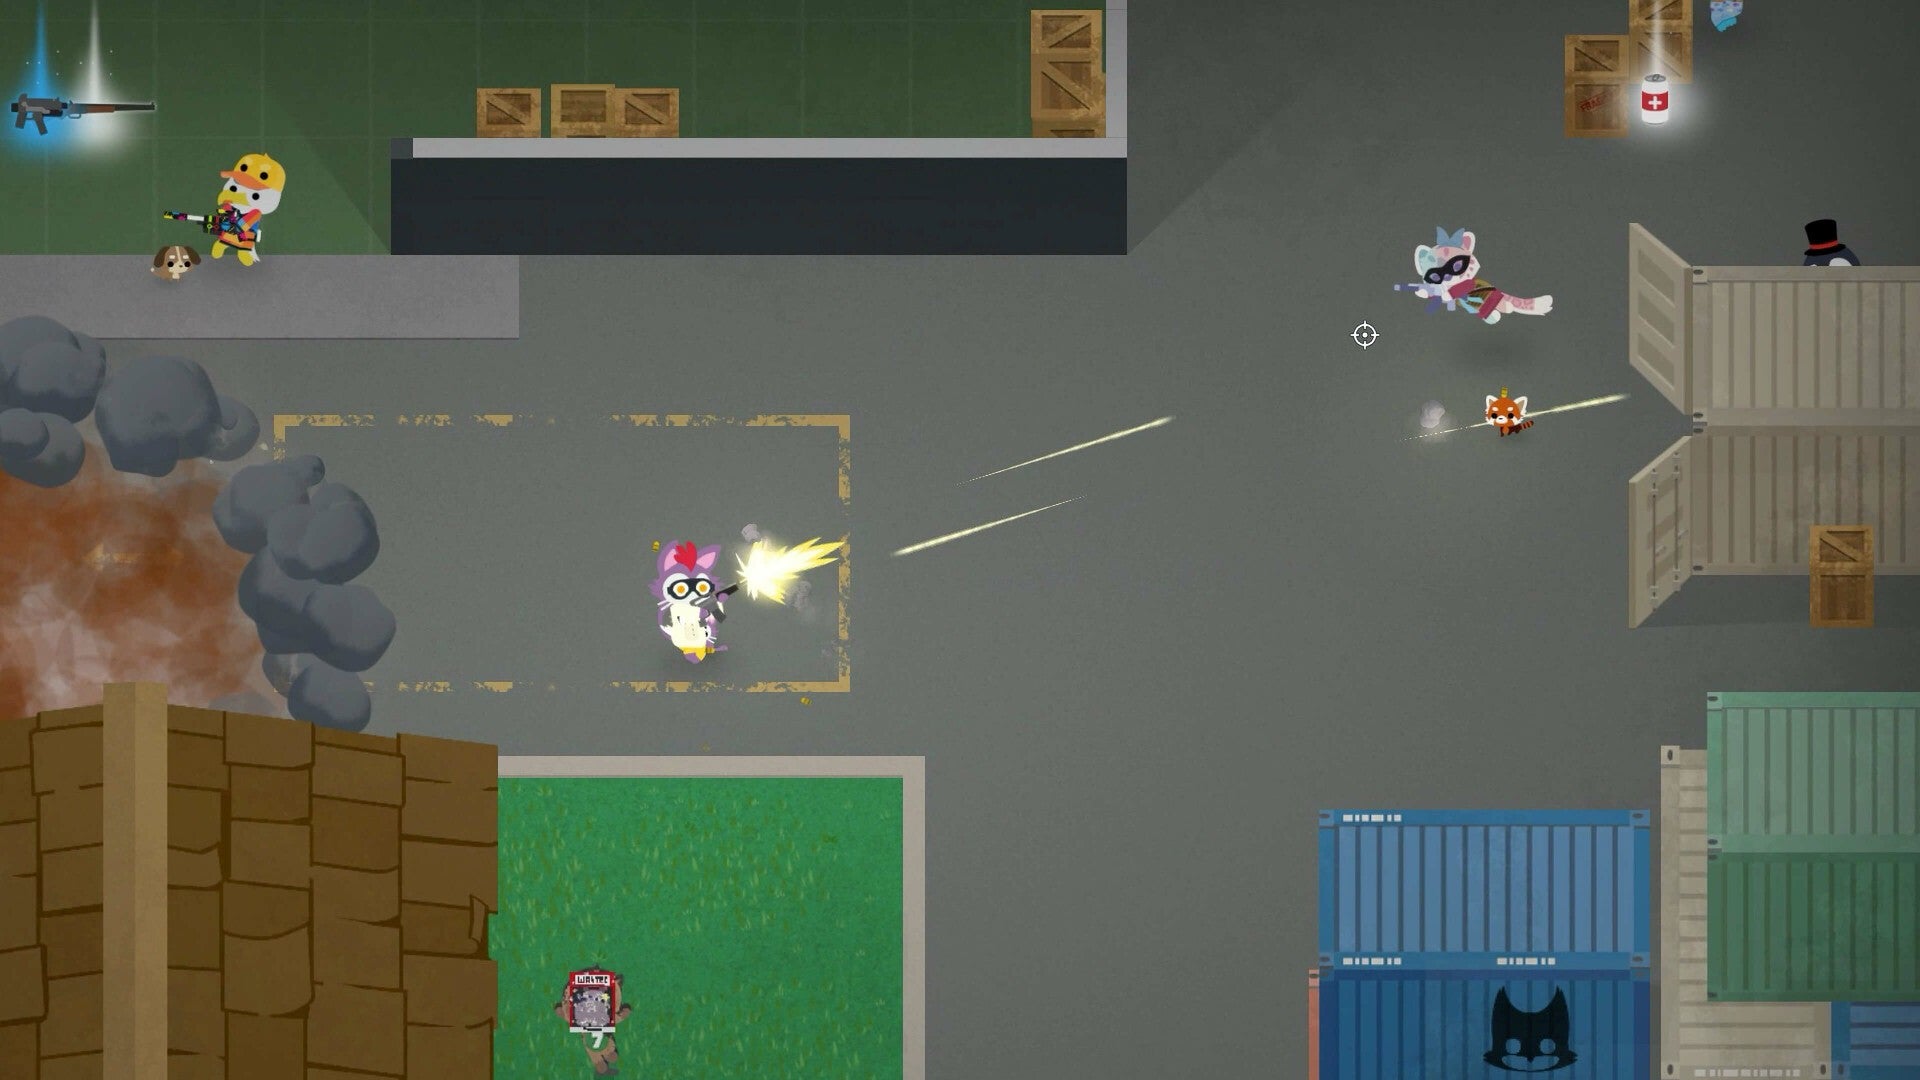 Super Animal Royale image showing cute animals in a gunfight surrounded by shipping containers.